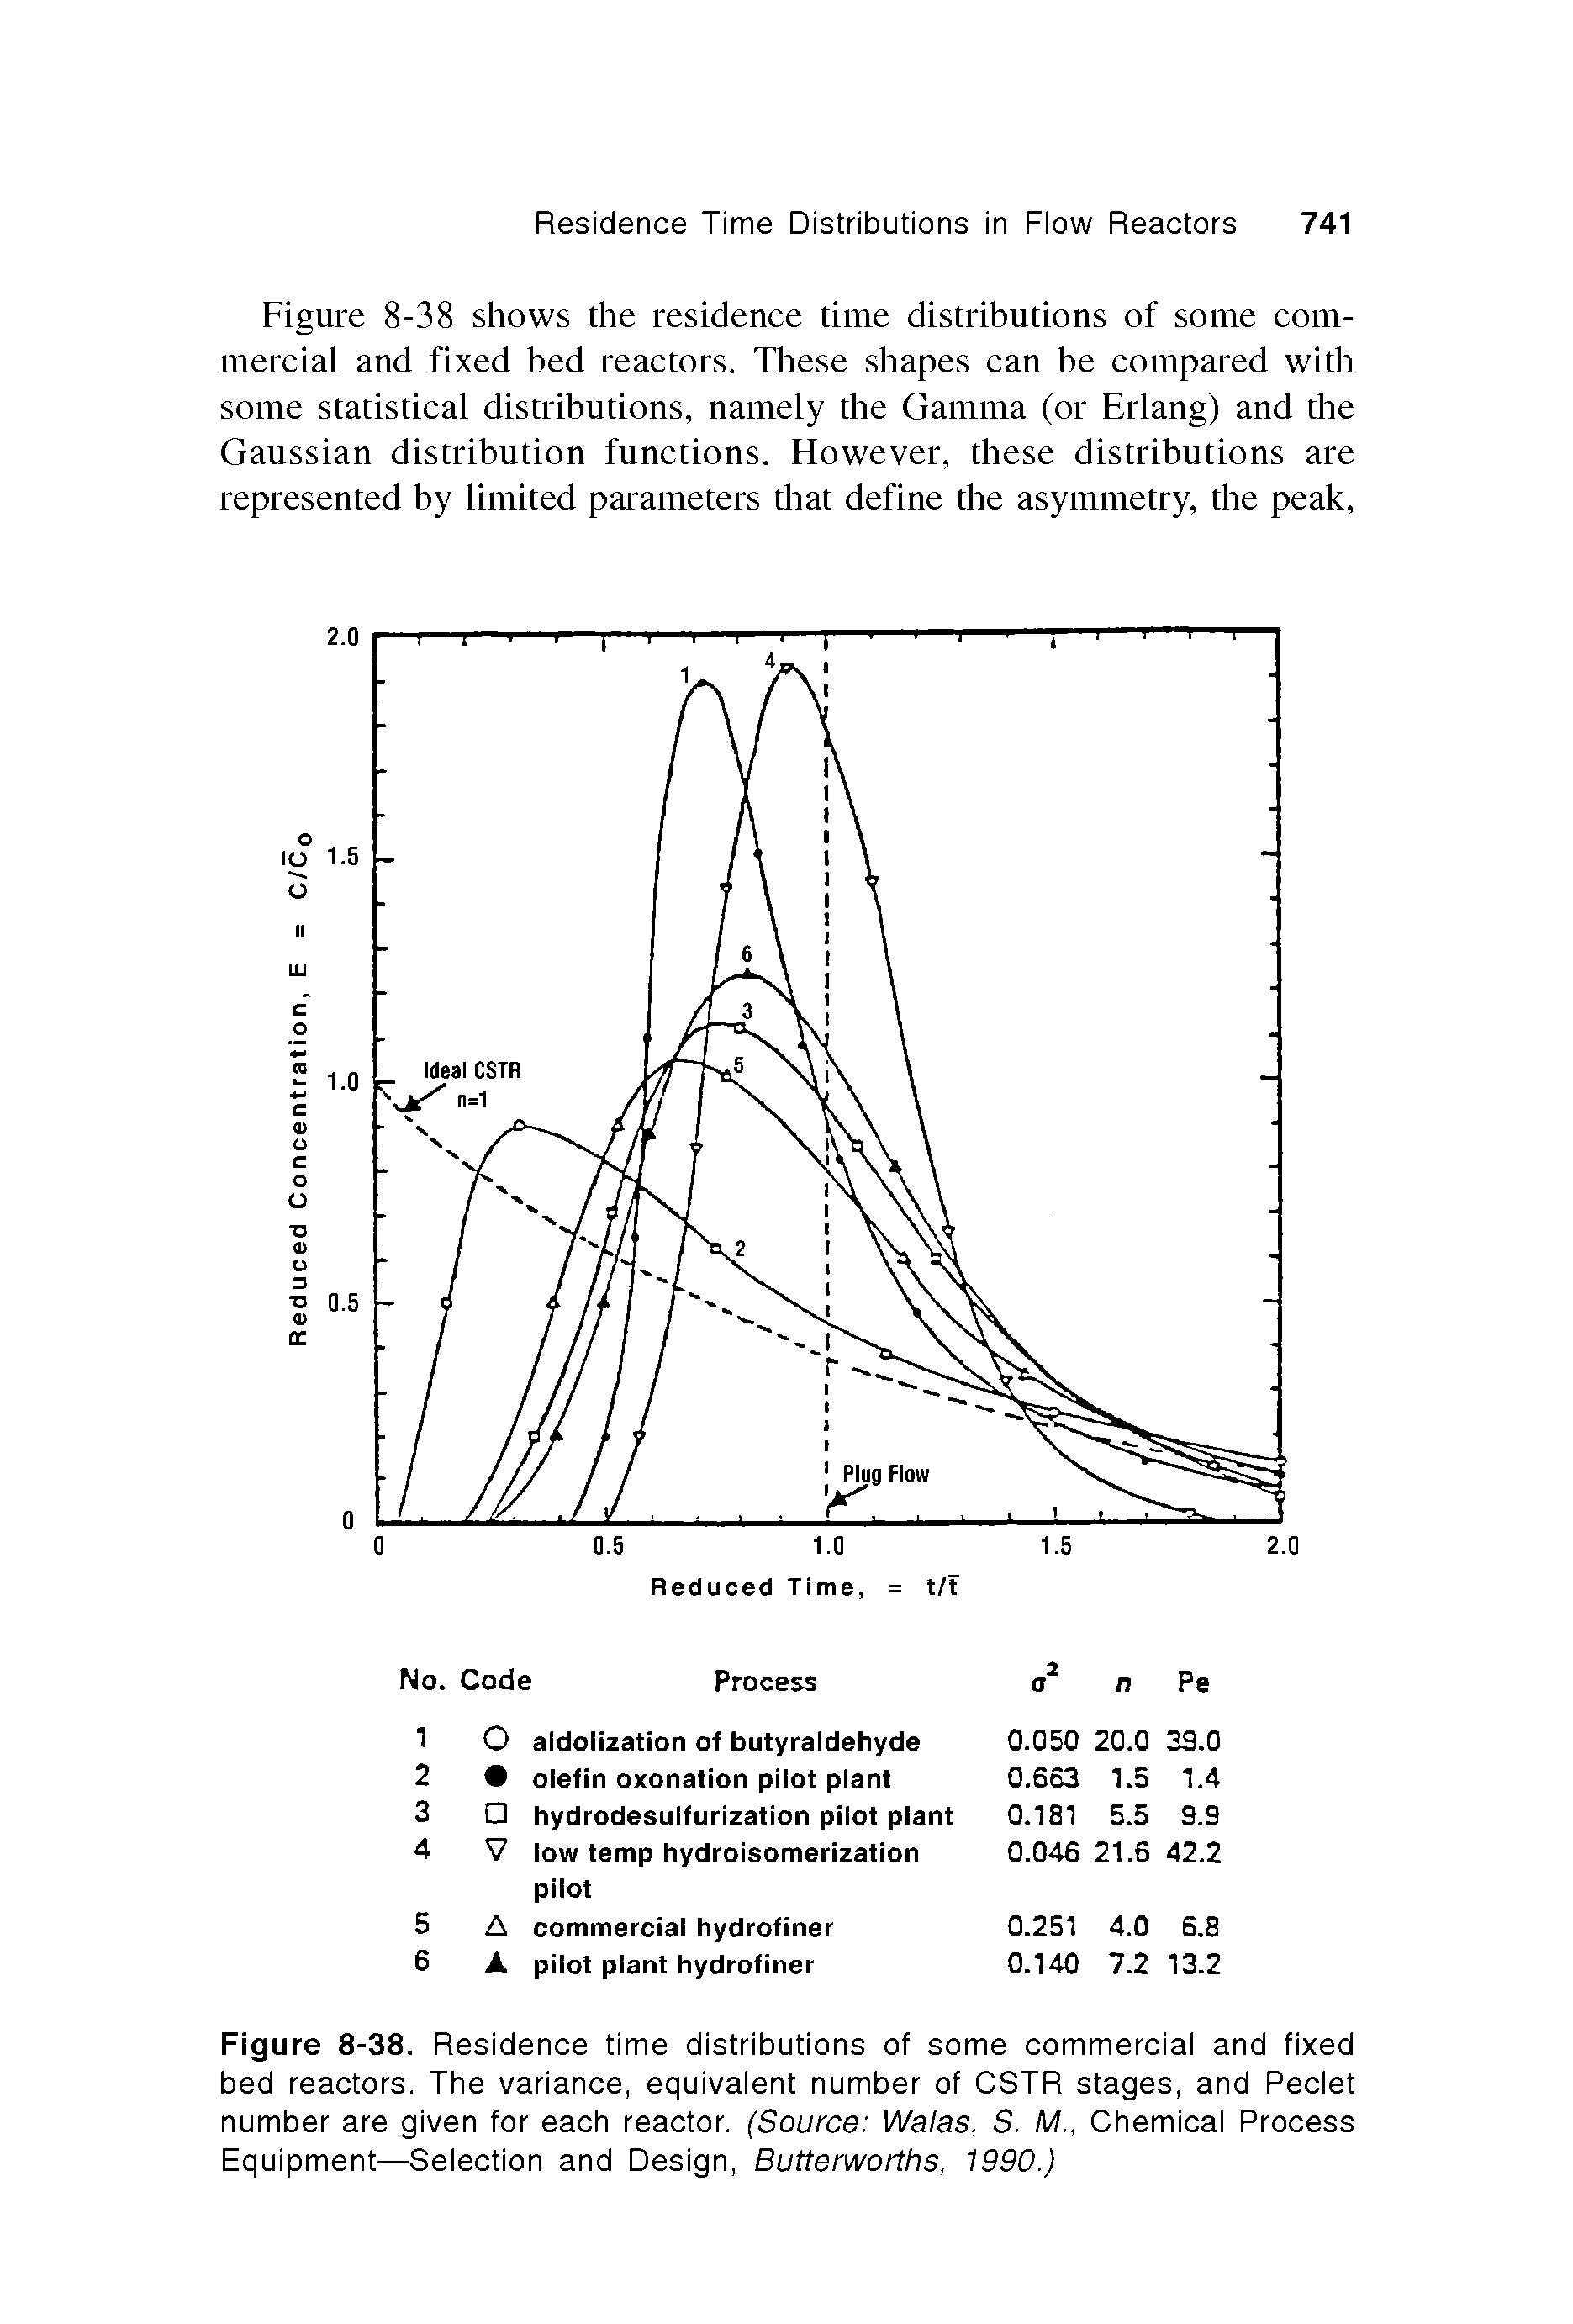 Figure 8-38. Residence time distributions of some commerciai and fixed bed reactors. The variance, equivaient number of CSTR stages, and Peciet number are given for each reactor. (Source Wales, S. M., Chemicai Process Equipment—Seiection and Design, Butterworths, 1990.)...